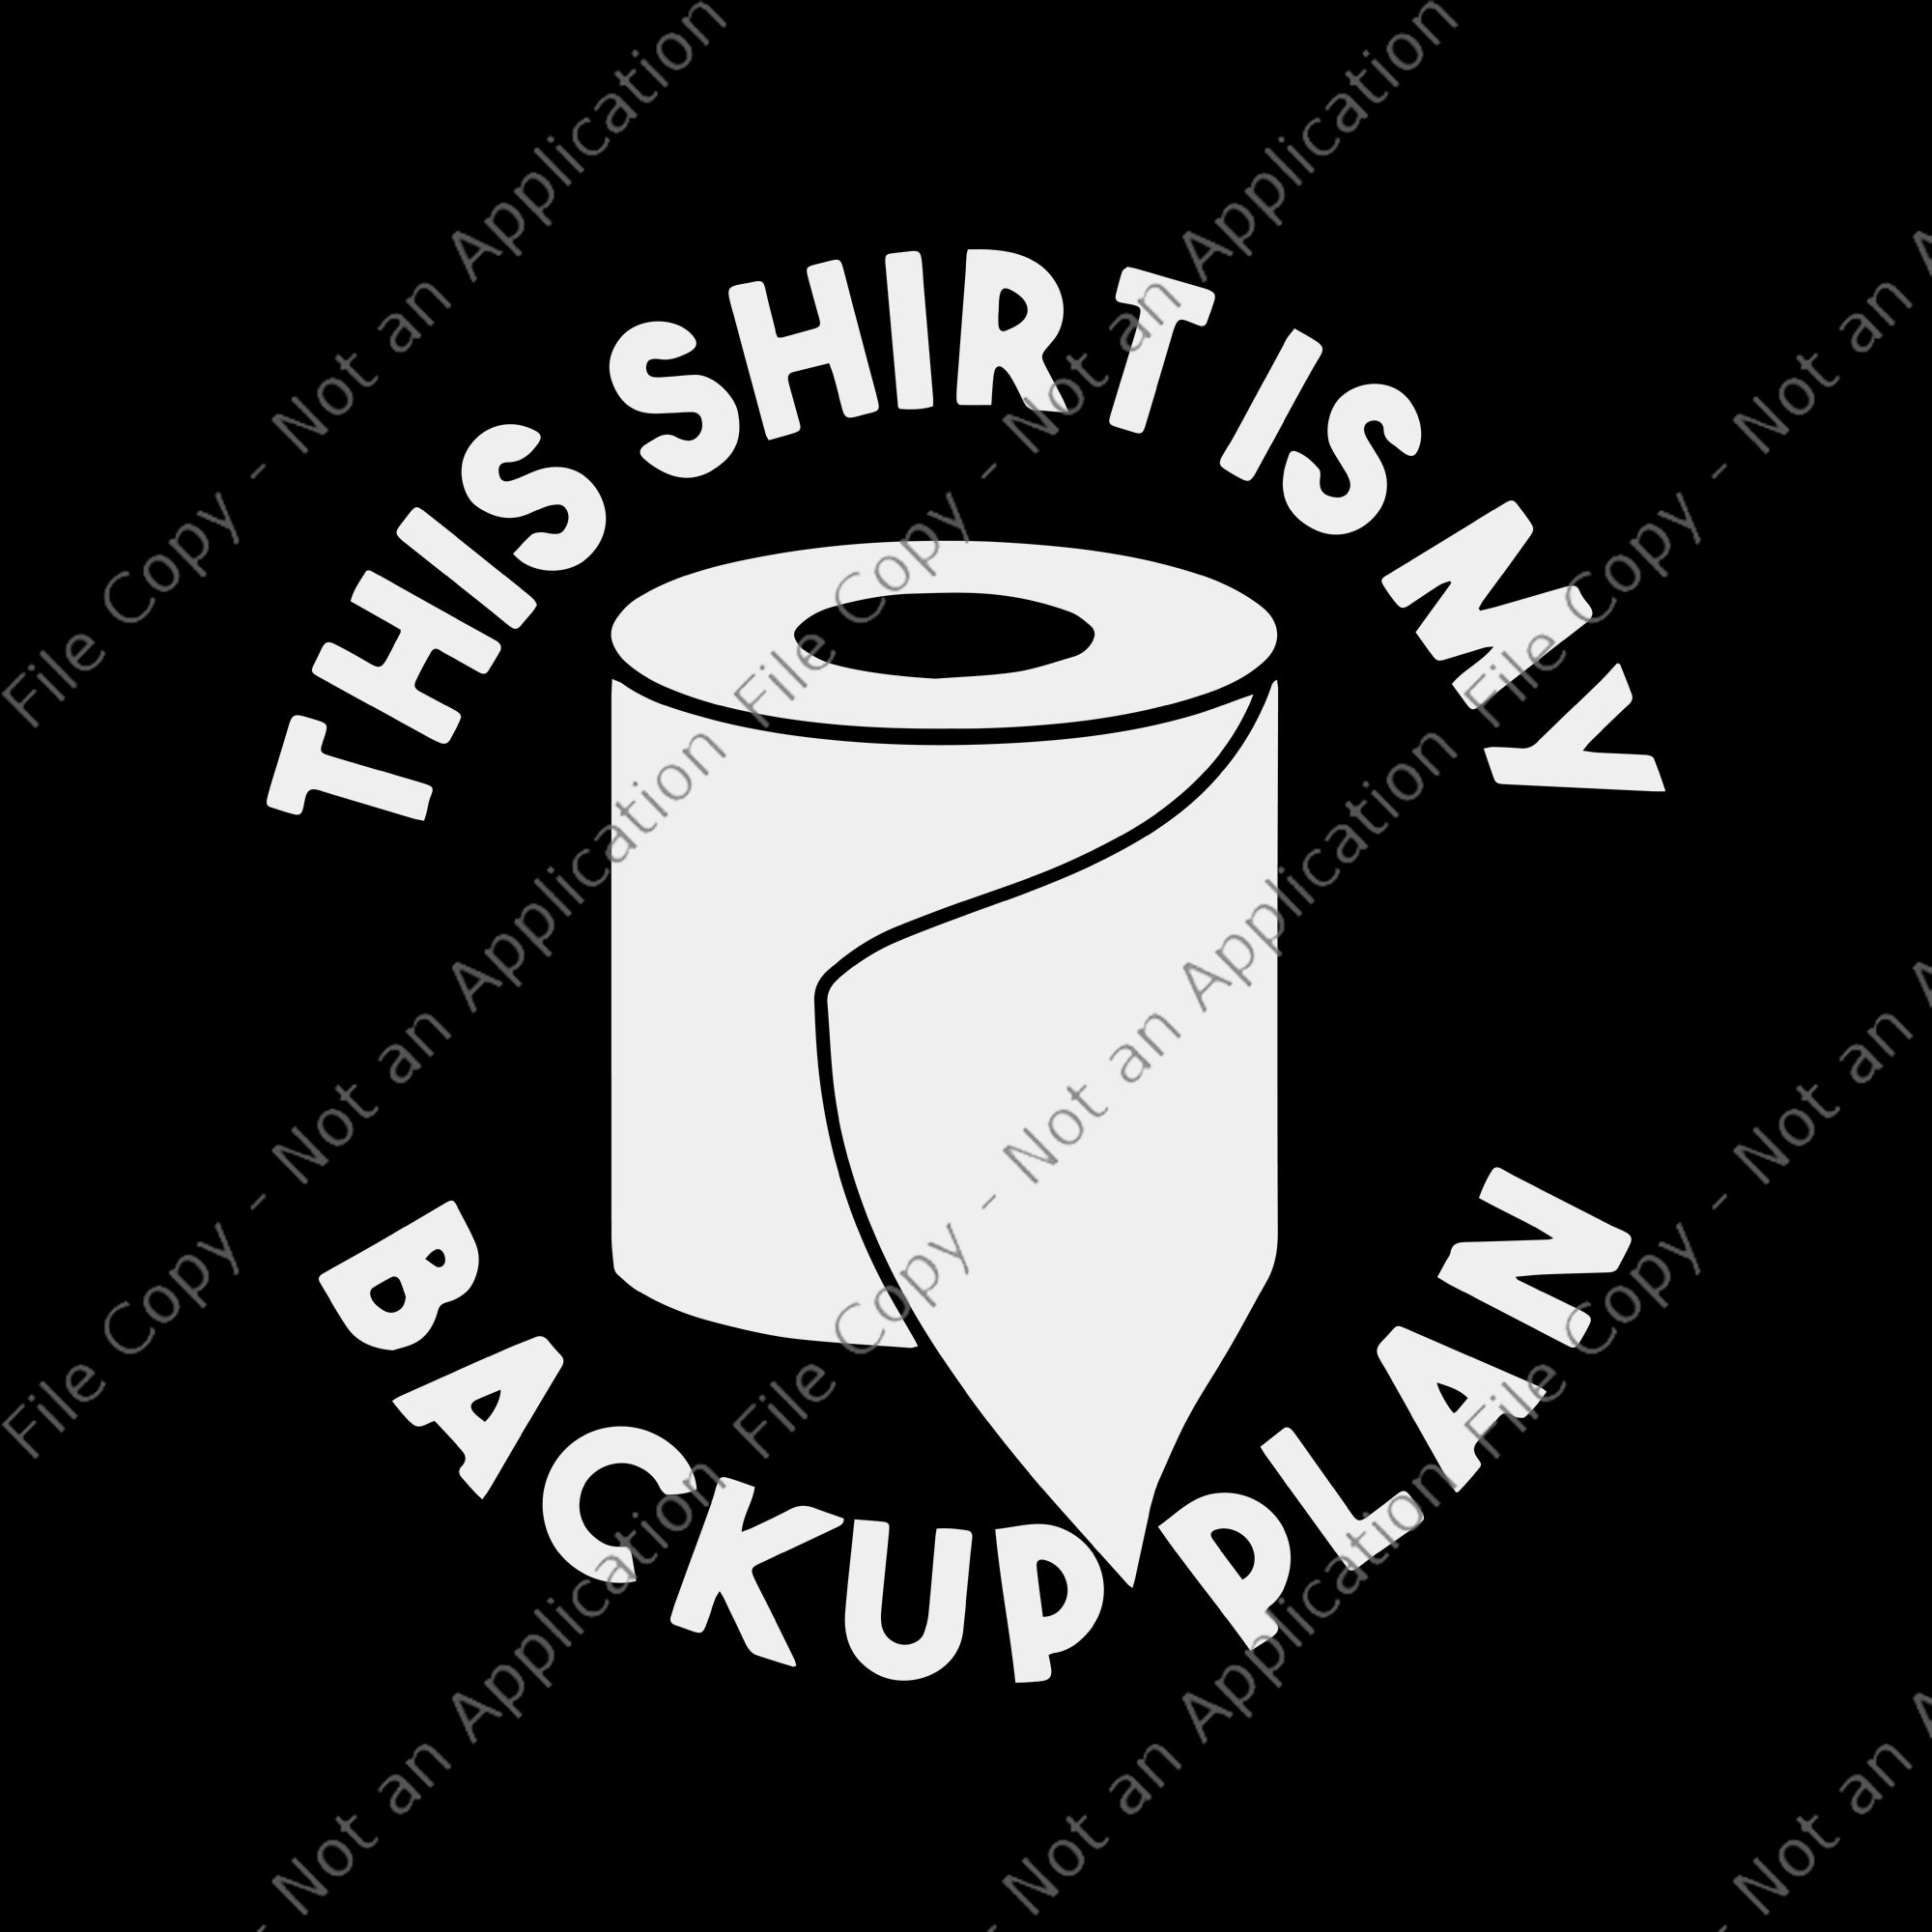 This shirt is my back up plan svg, This shirt is my back up plan png, eps, dxf, svg file